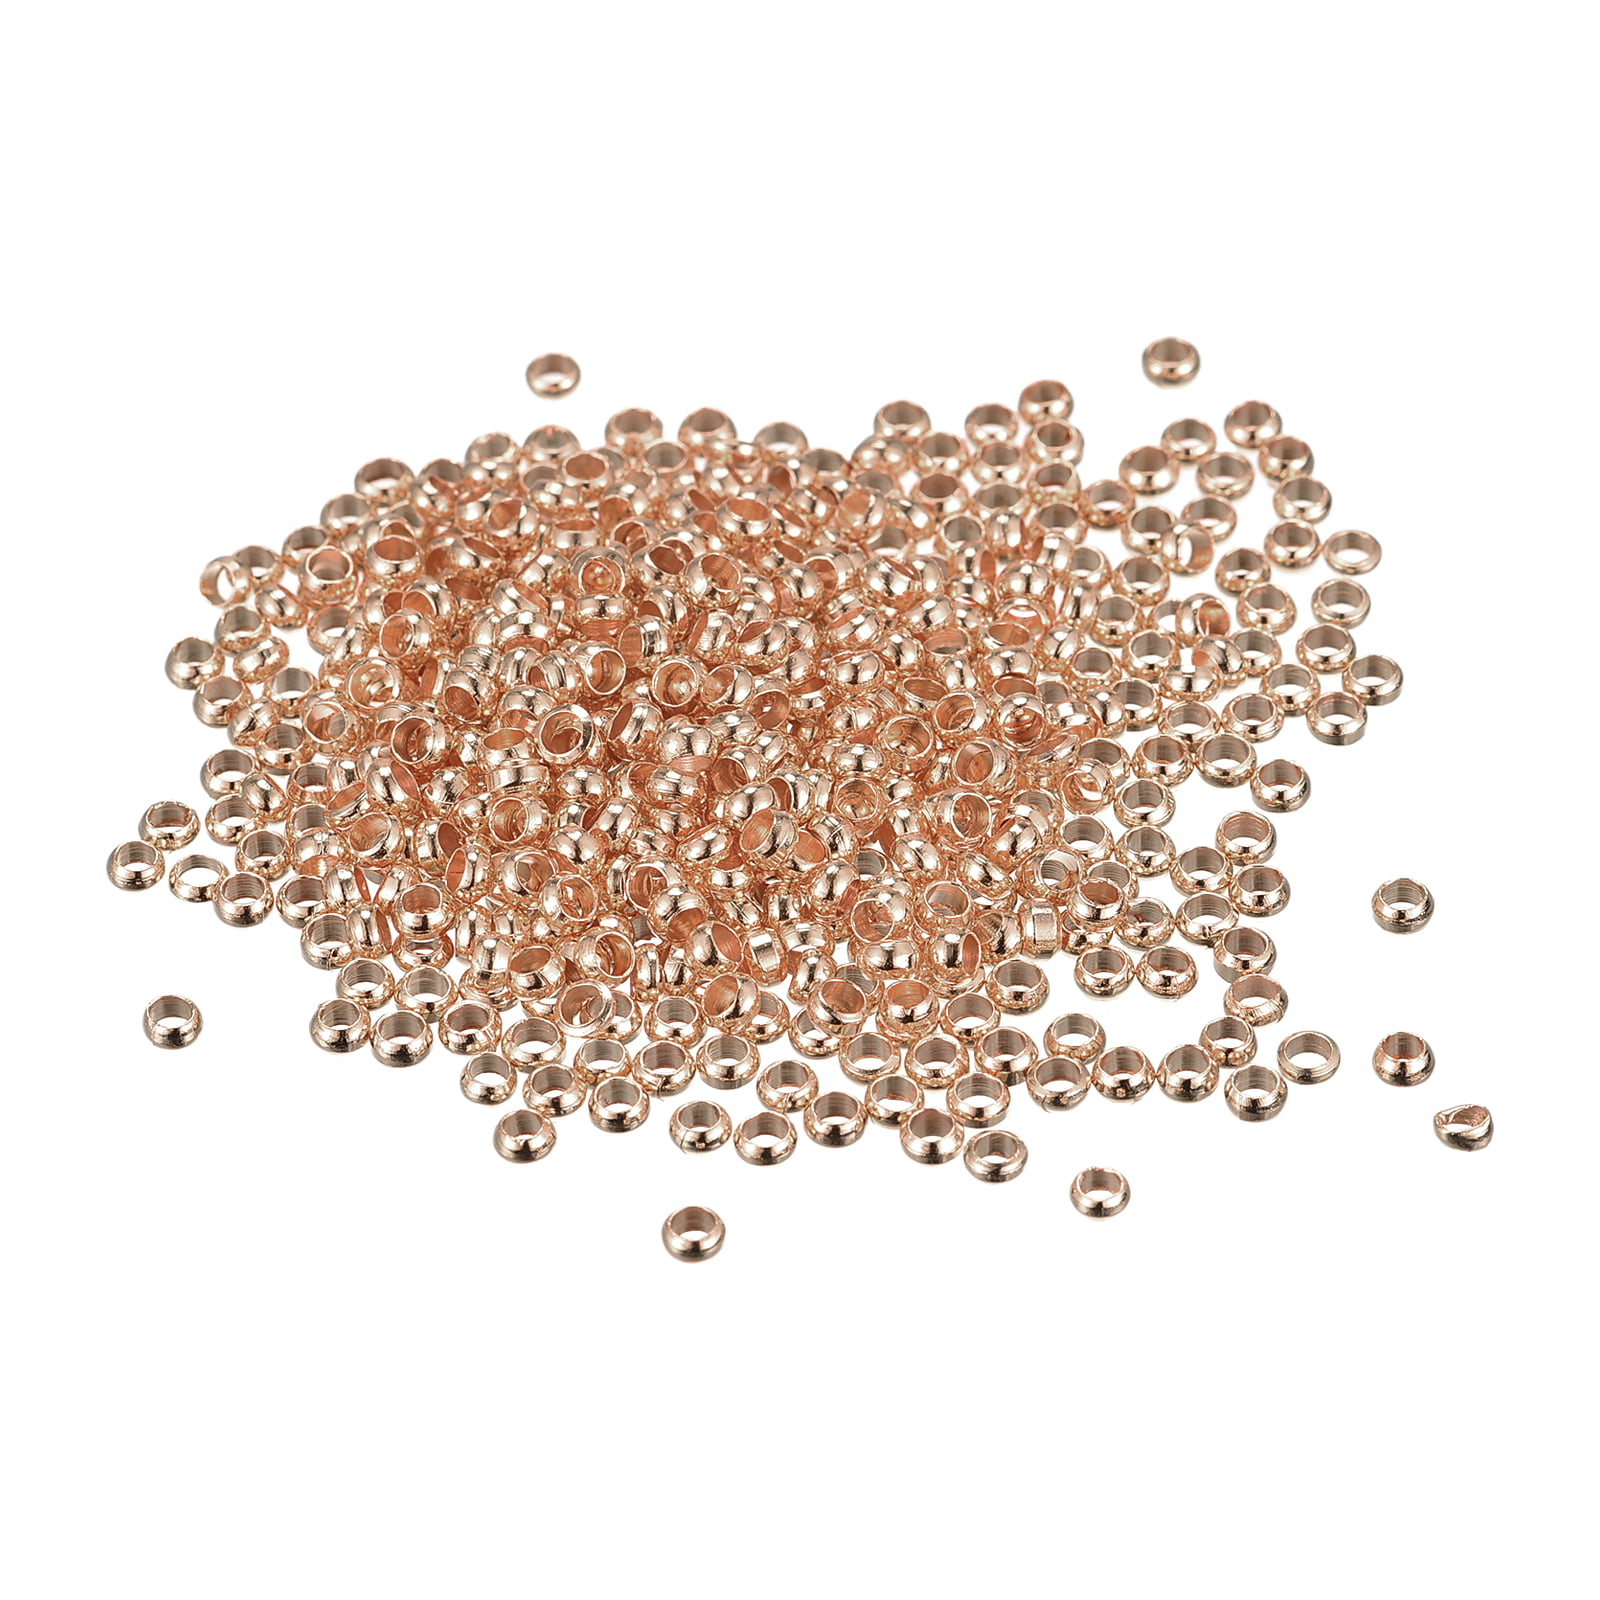 Uxcell 1000Pack 2.5x2.5mm Crimp Tube Beads Jewelry Making Crimp End Spacer Bead, Copper, Size: 2.5 mm x 2.5 mm, Bronze